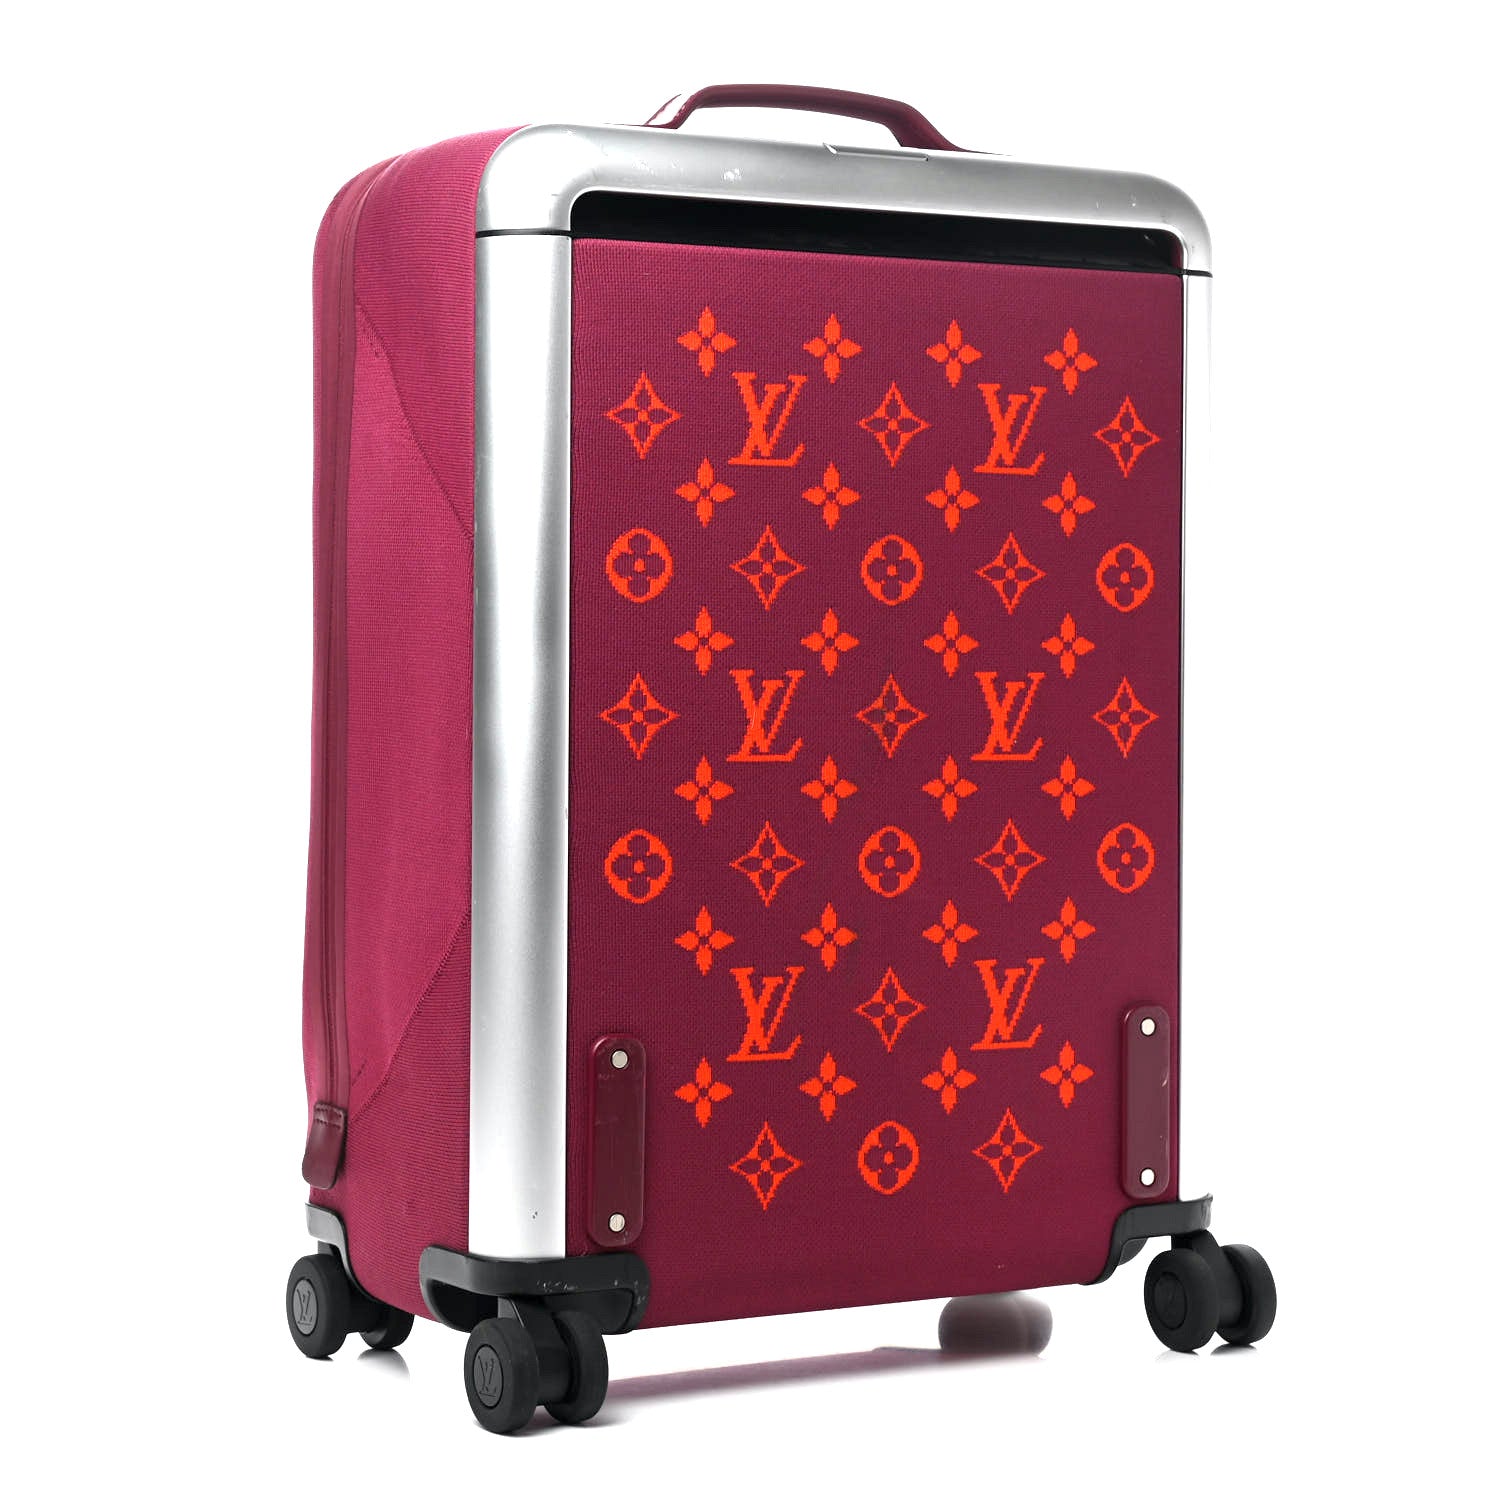 Louis Vuitton: Louis Vuitton: The Rolling Luggage Series - Luxferity